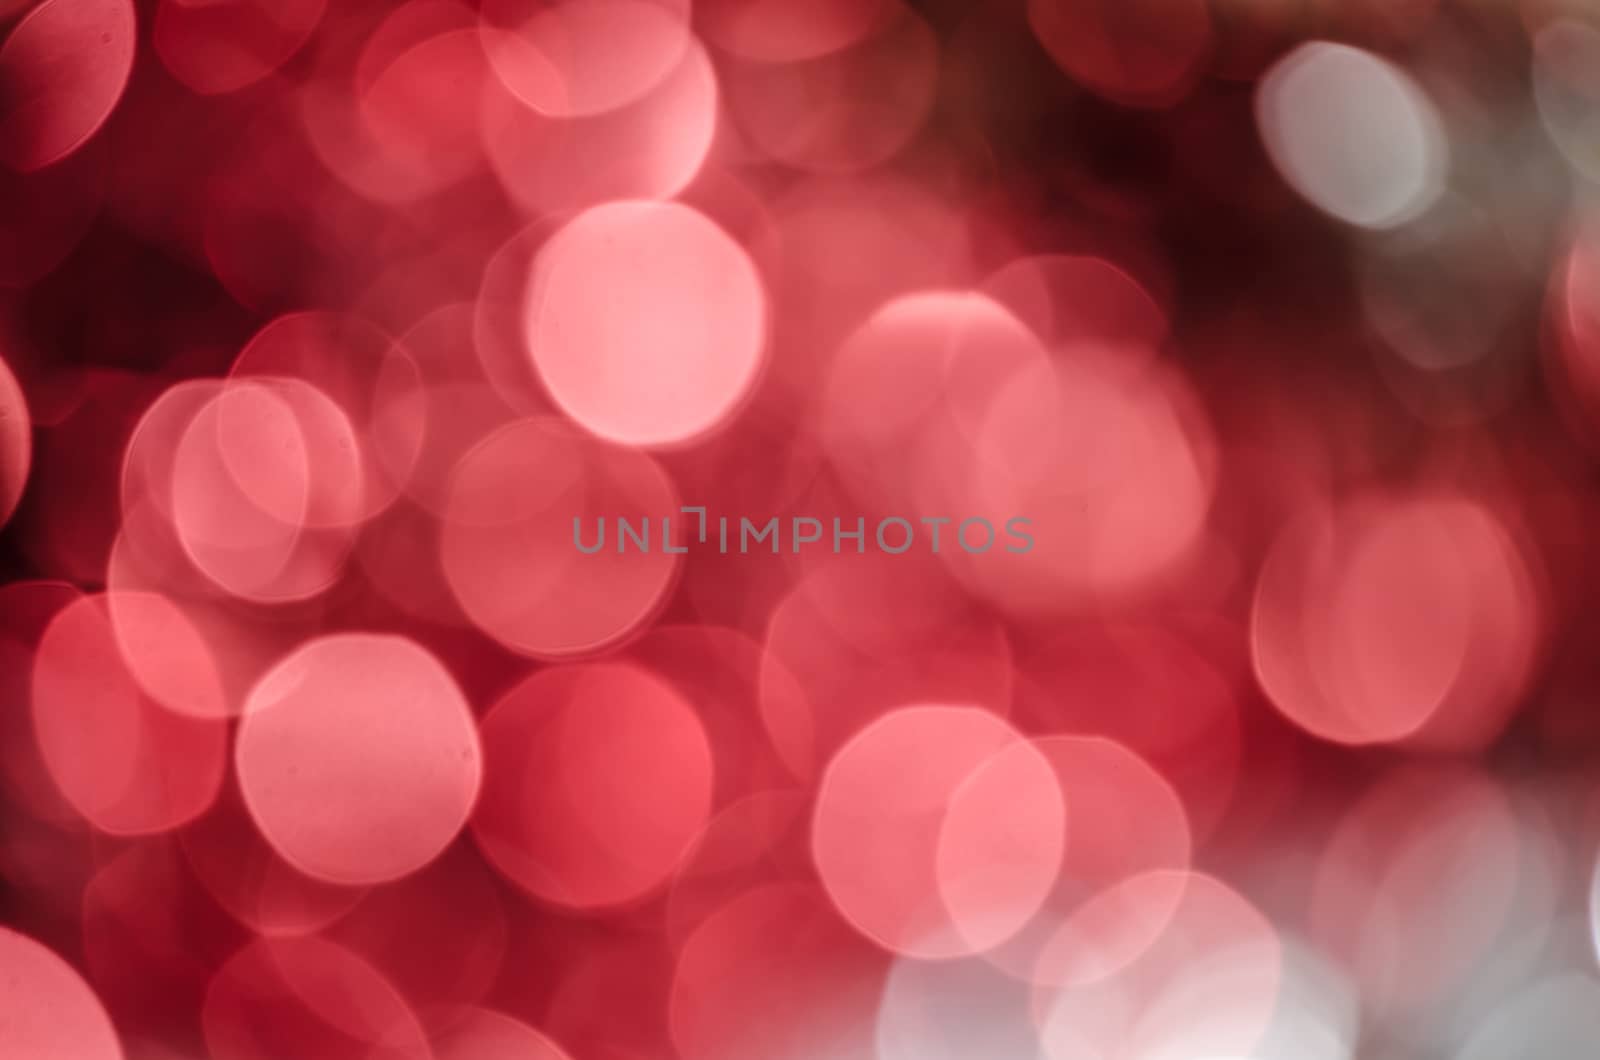 Red silver circle blur lights as christmas background.